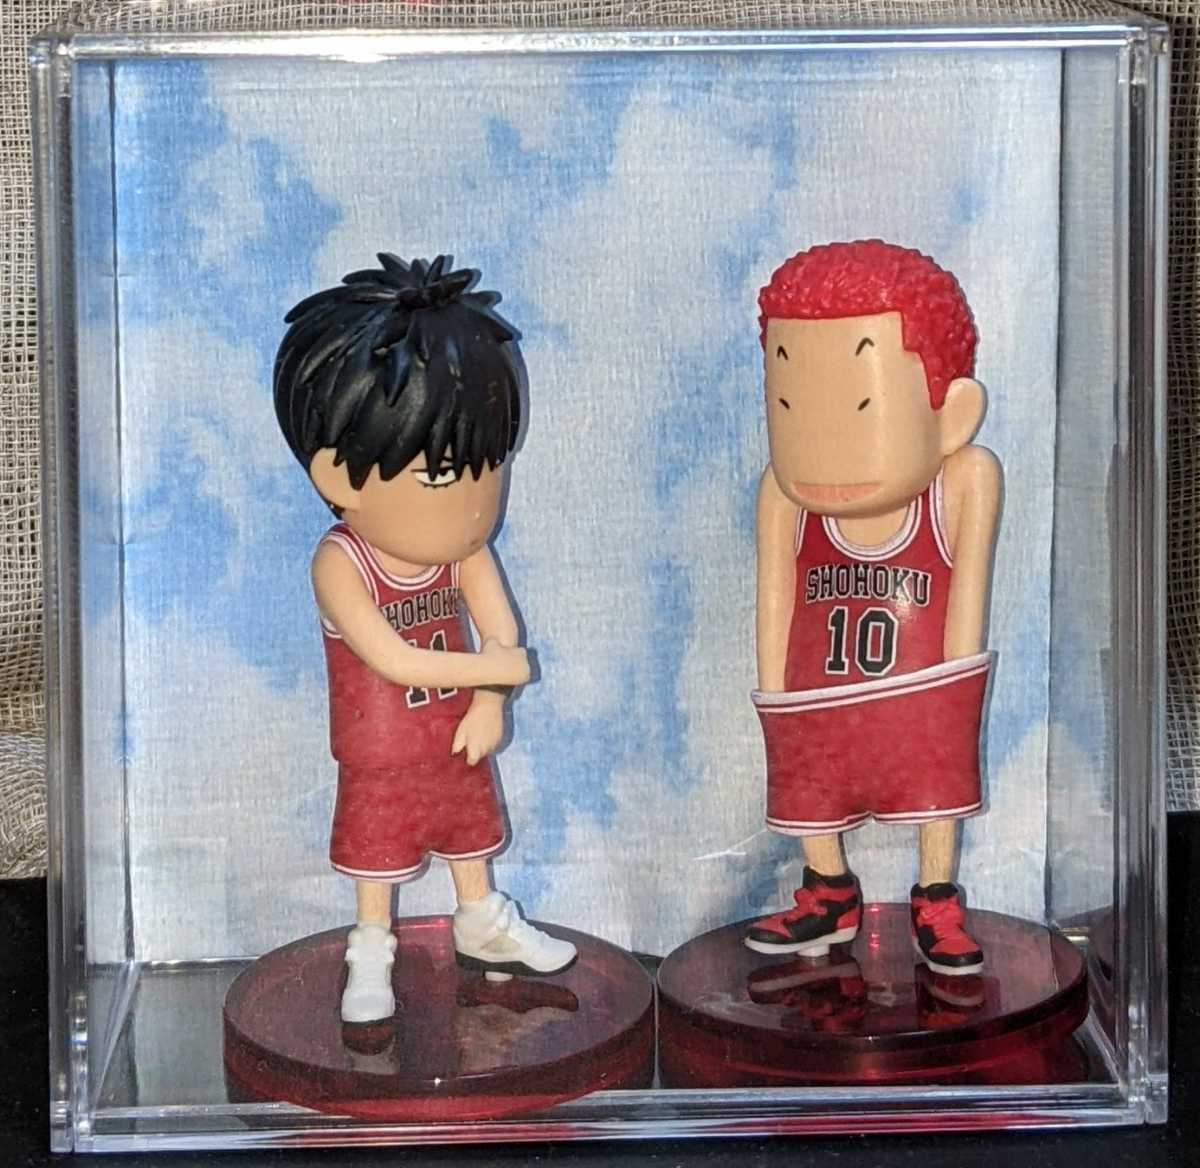 FIGURE COLLECTION　劇場版　スラムダンク THE FIRST SLAM DUNK 桜木花道 流川楓 流花　花流　スラダン　フィギュア　ケース入り_画像1